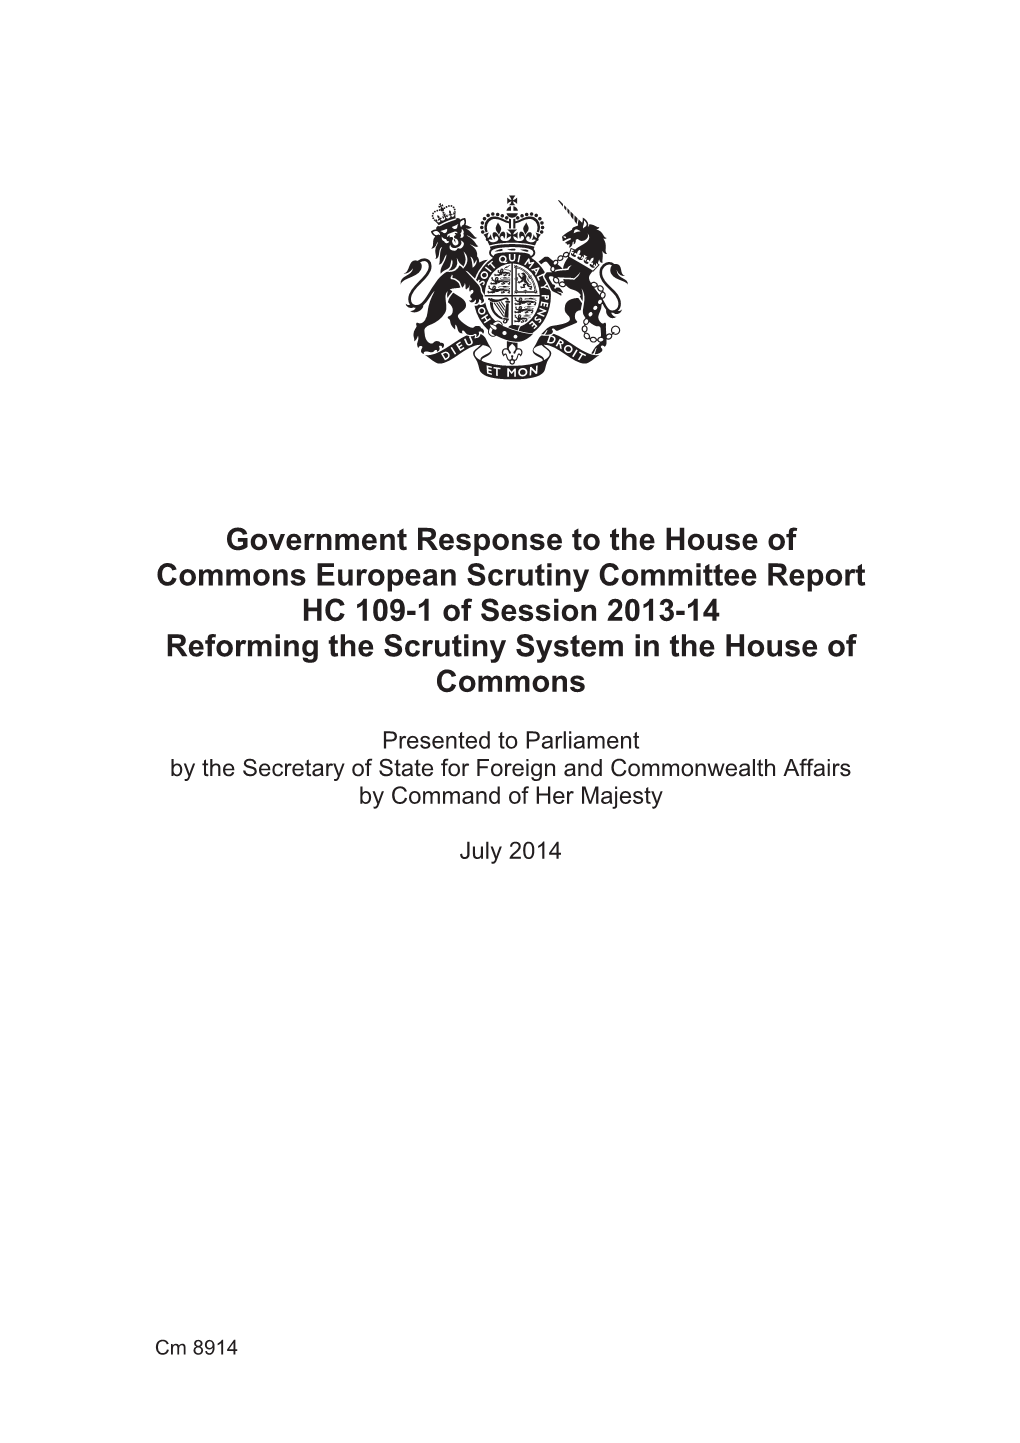 Government Response to the House of Commons European Scrutiny Committee Report HC 109-1 of Session 2013-14 Reforming the Scrutiny System in the House of Commons